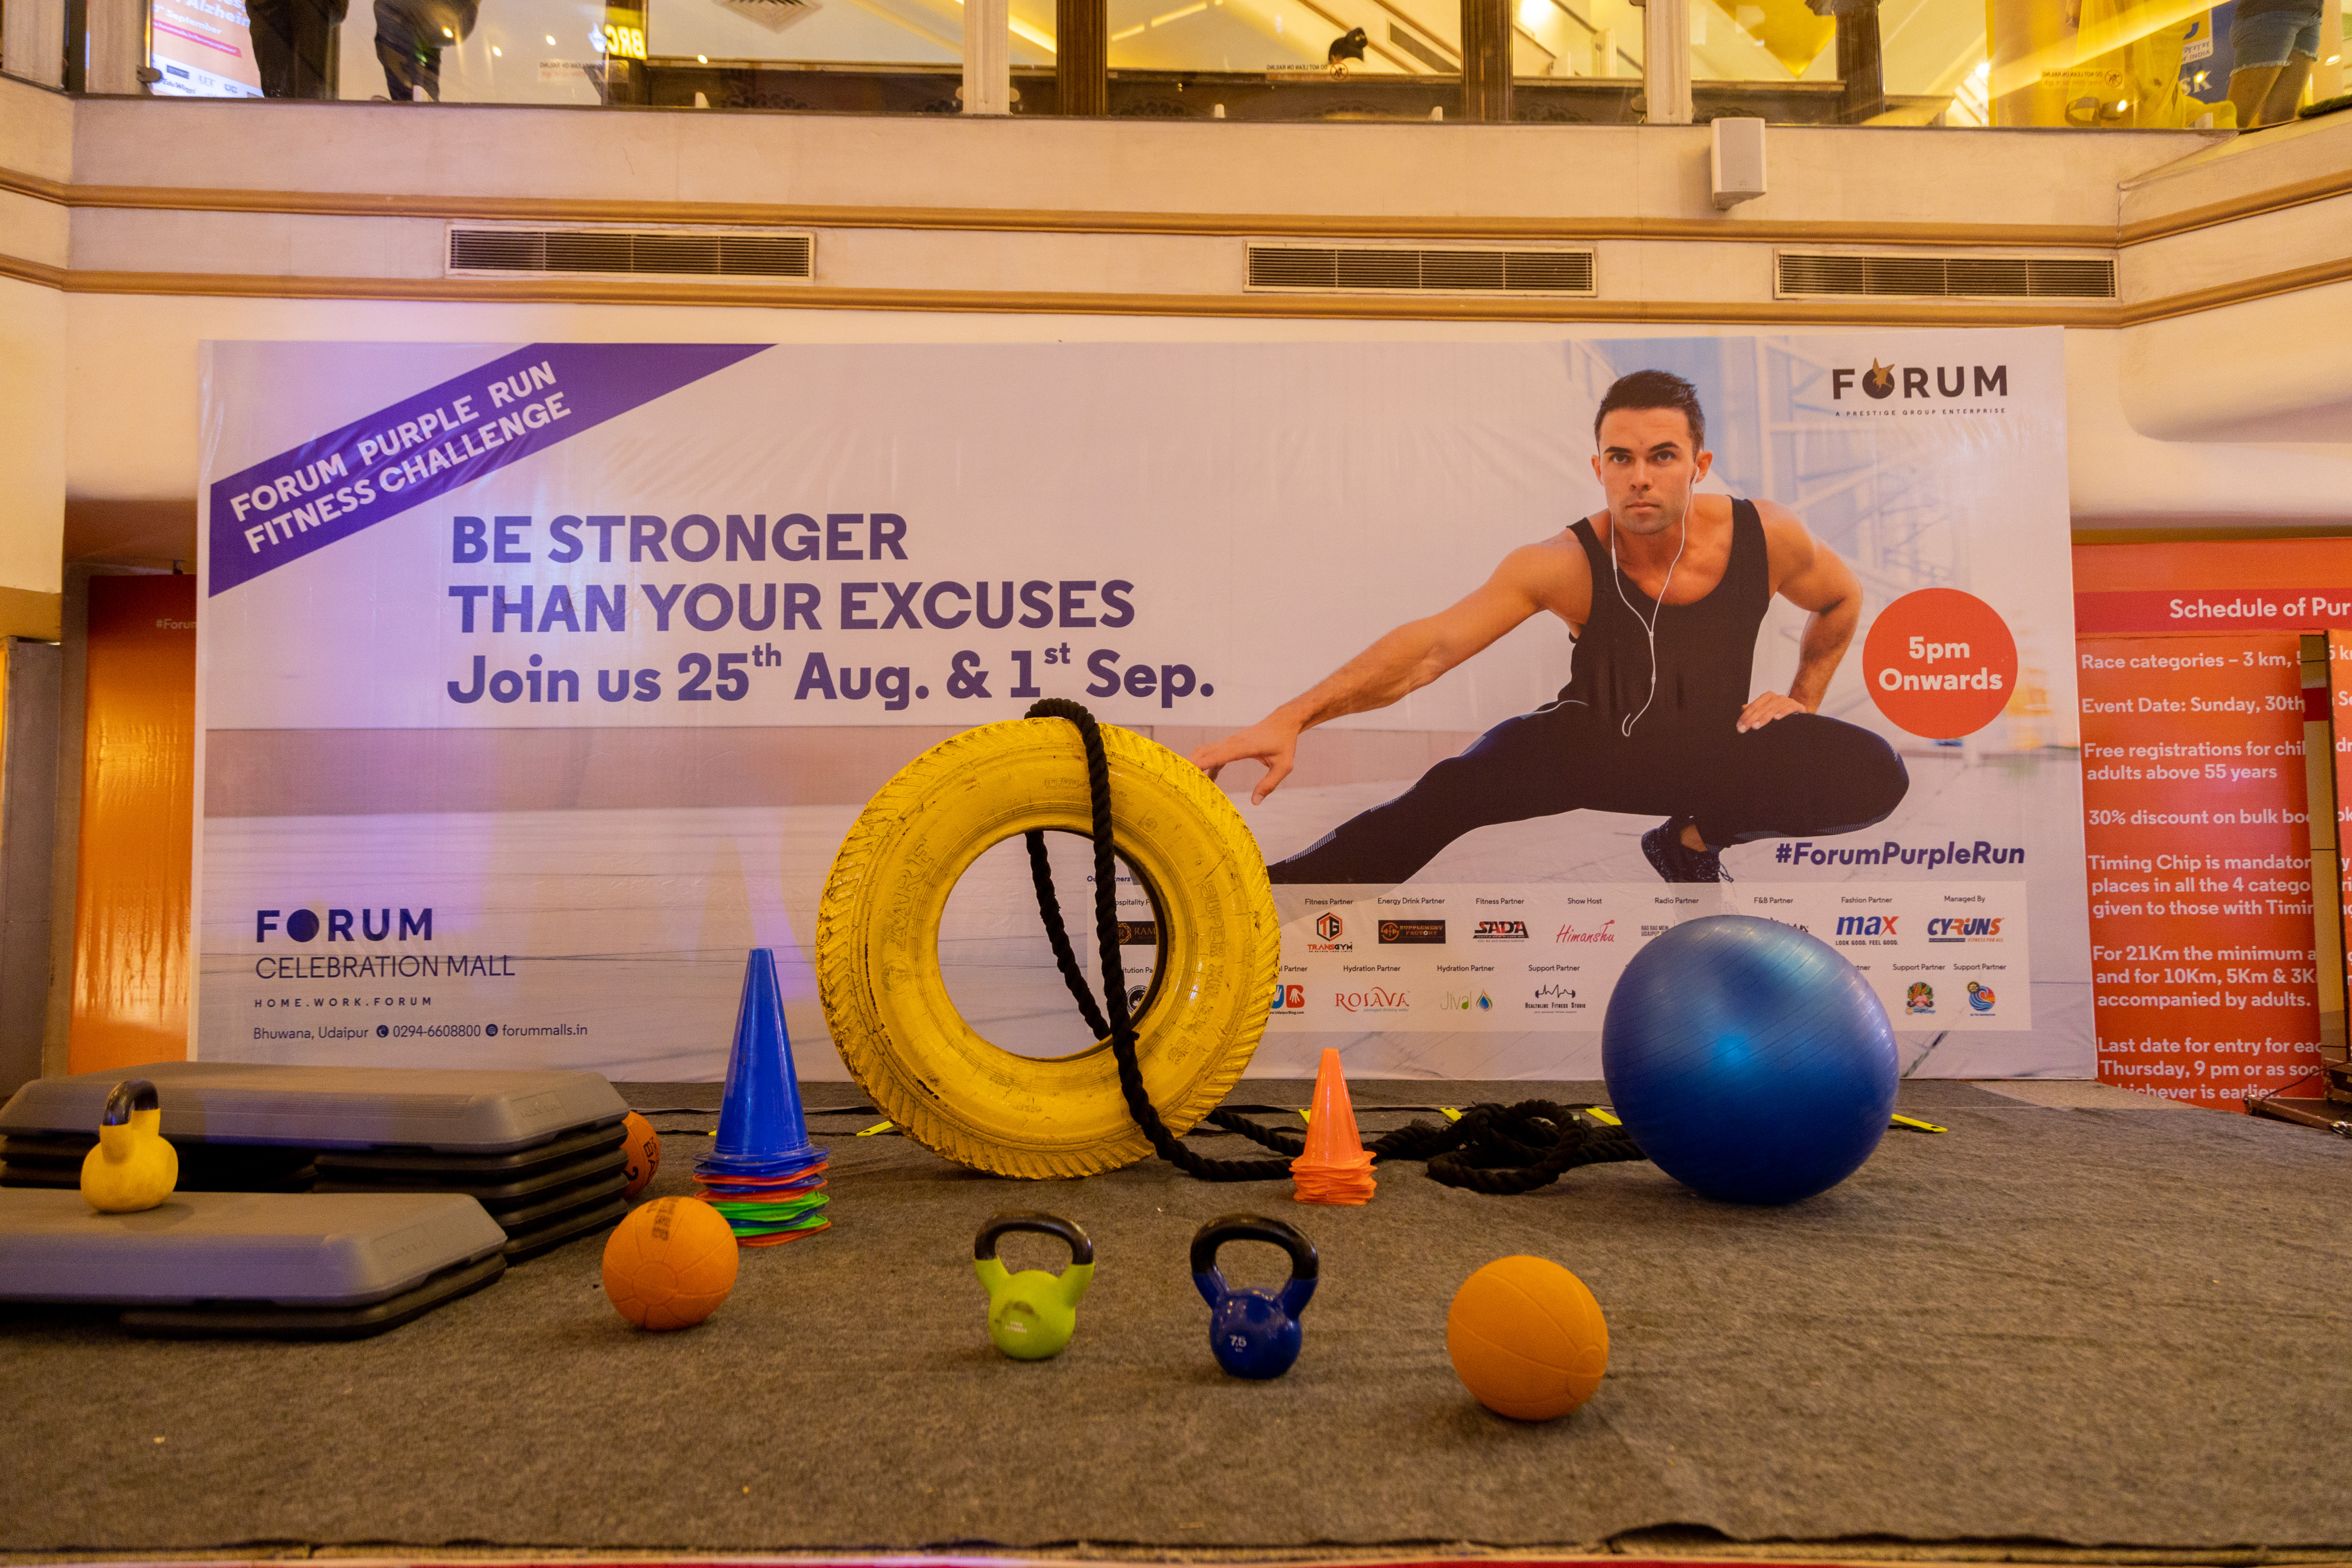 Fitness Challenge Event by Forum Celebration Mall Tested Shoppers’ Strength